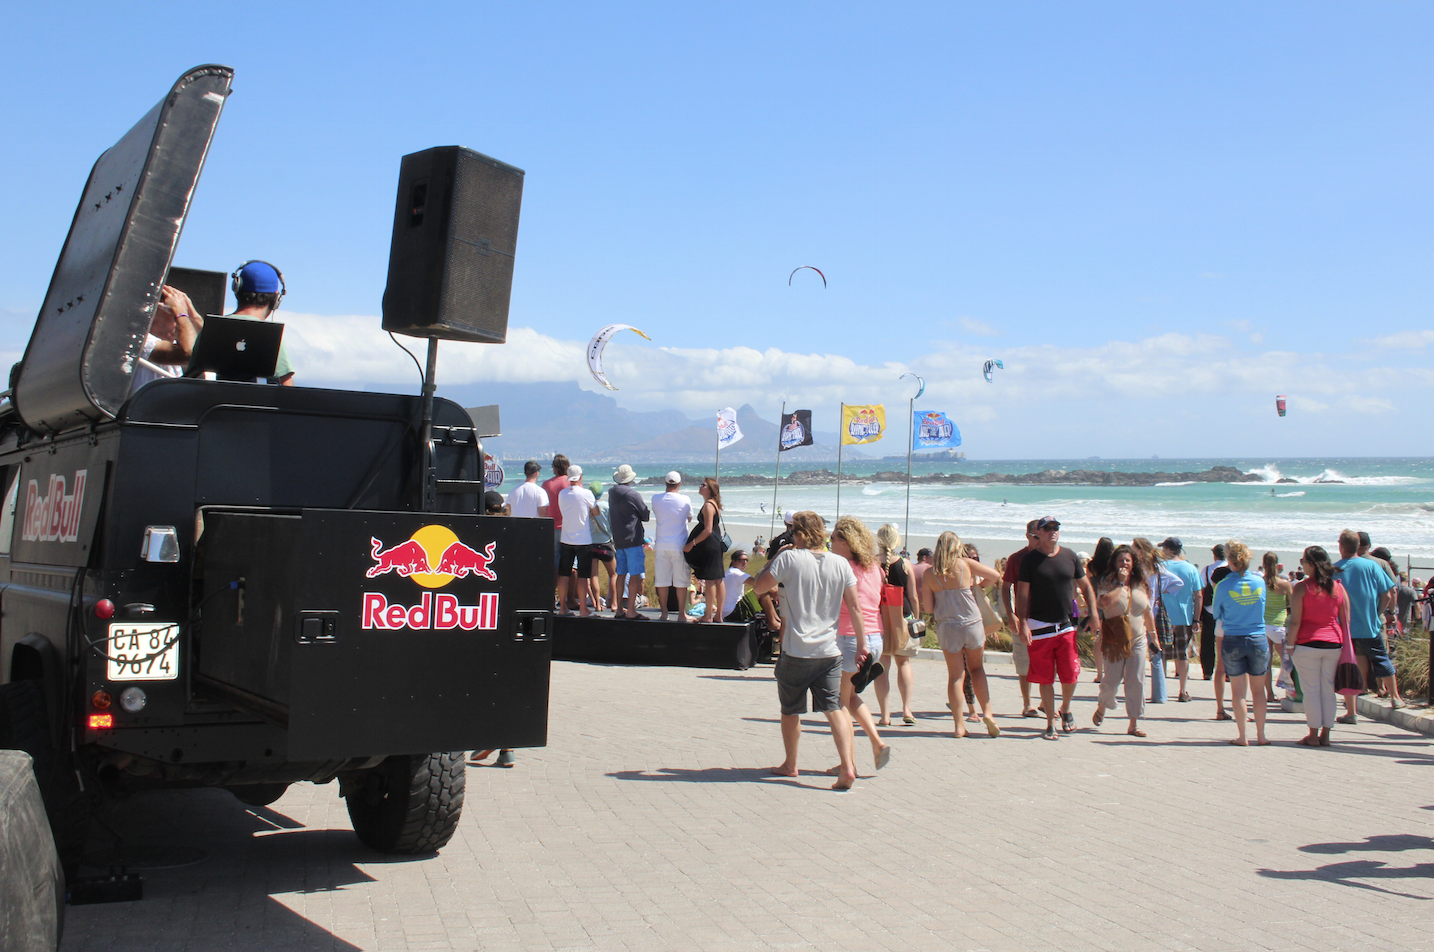 Red Bull King of the air